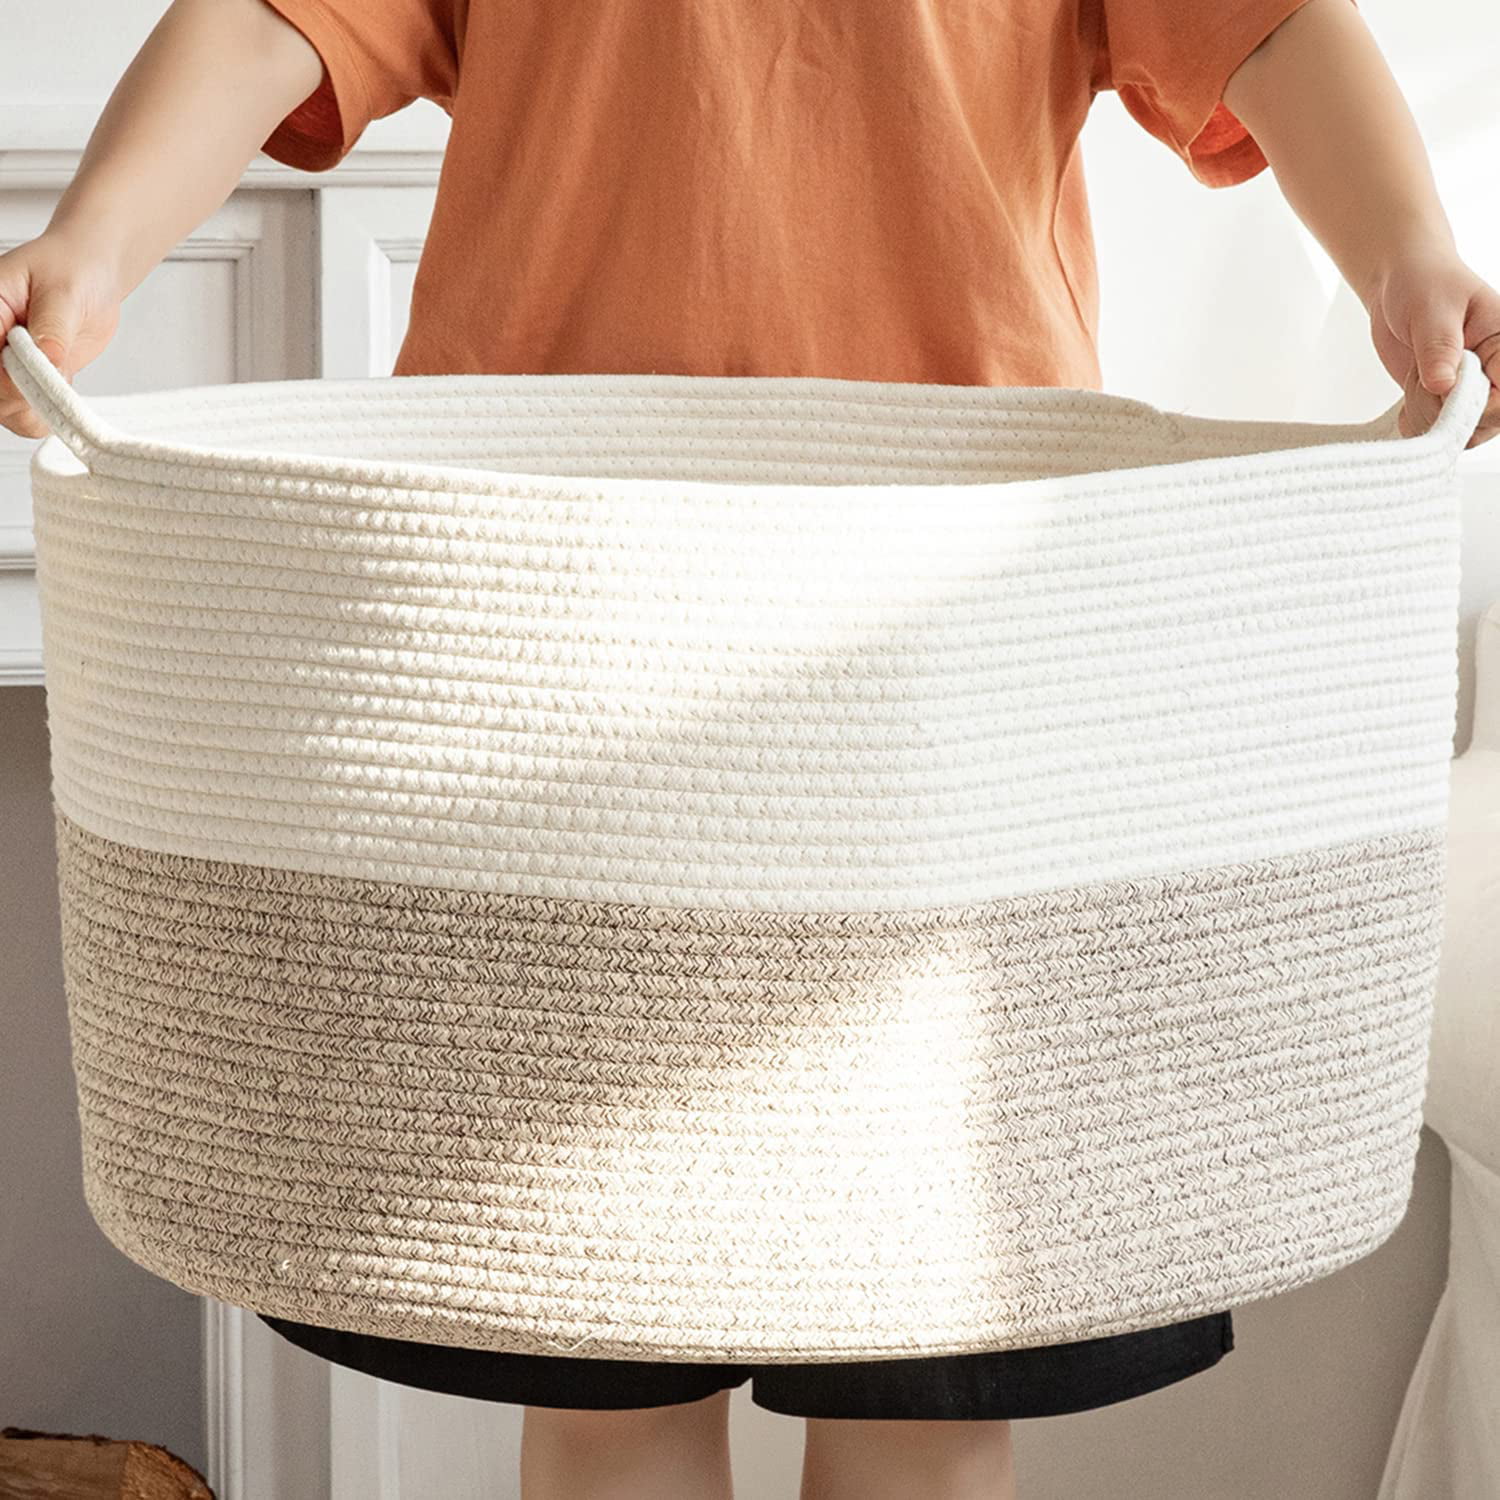 Extra Large Premium-Quality Rope Basket 22" X 14" for Toy Baskets Woven Laundry 